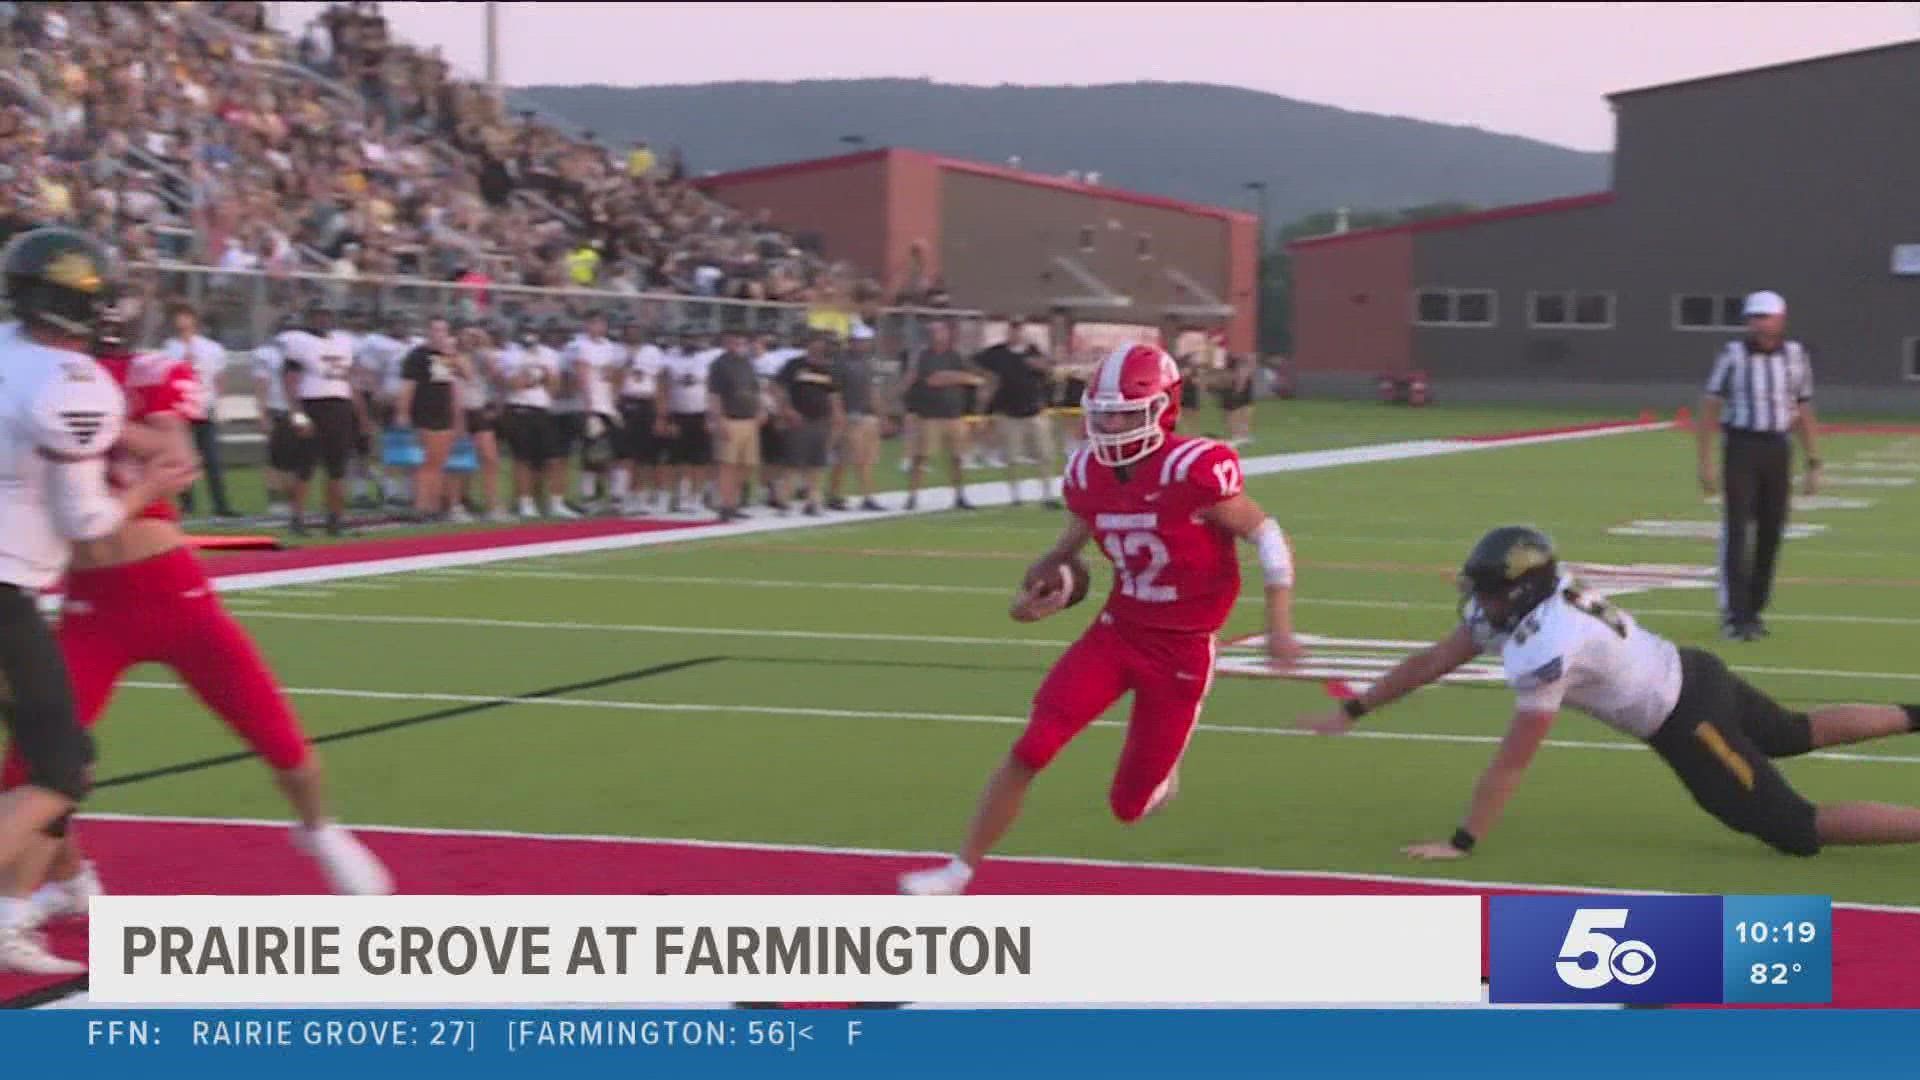 Farmington took home bragging rights in the Battle of Highway 62 game this year.